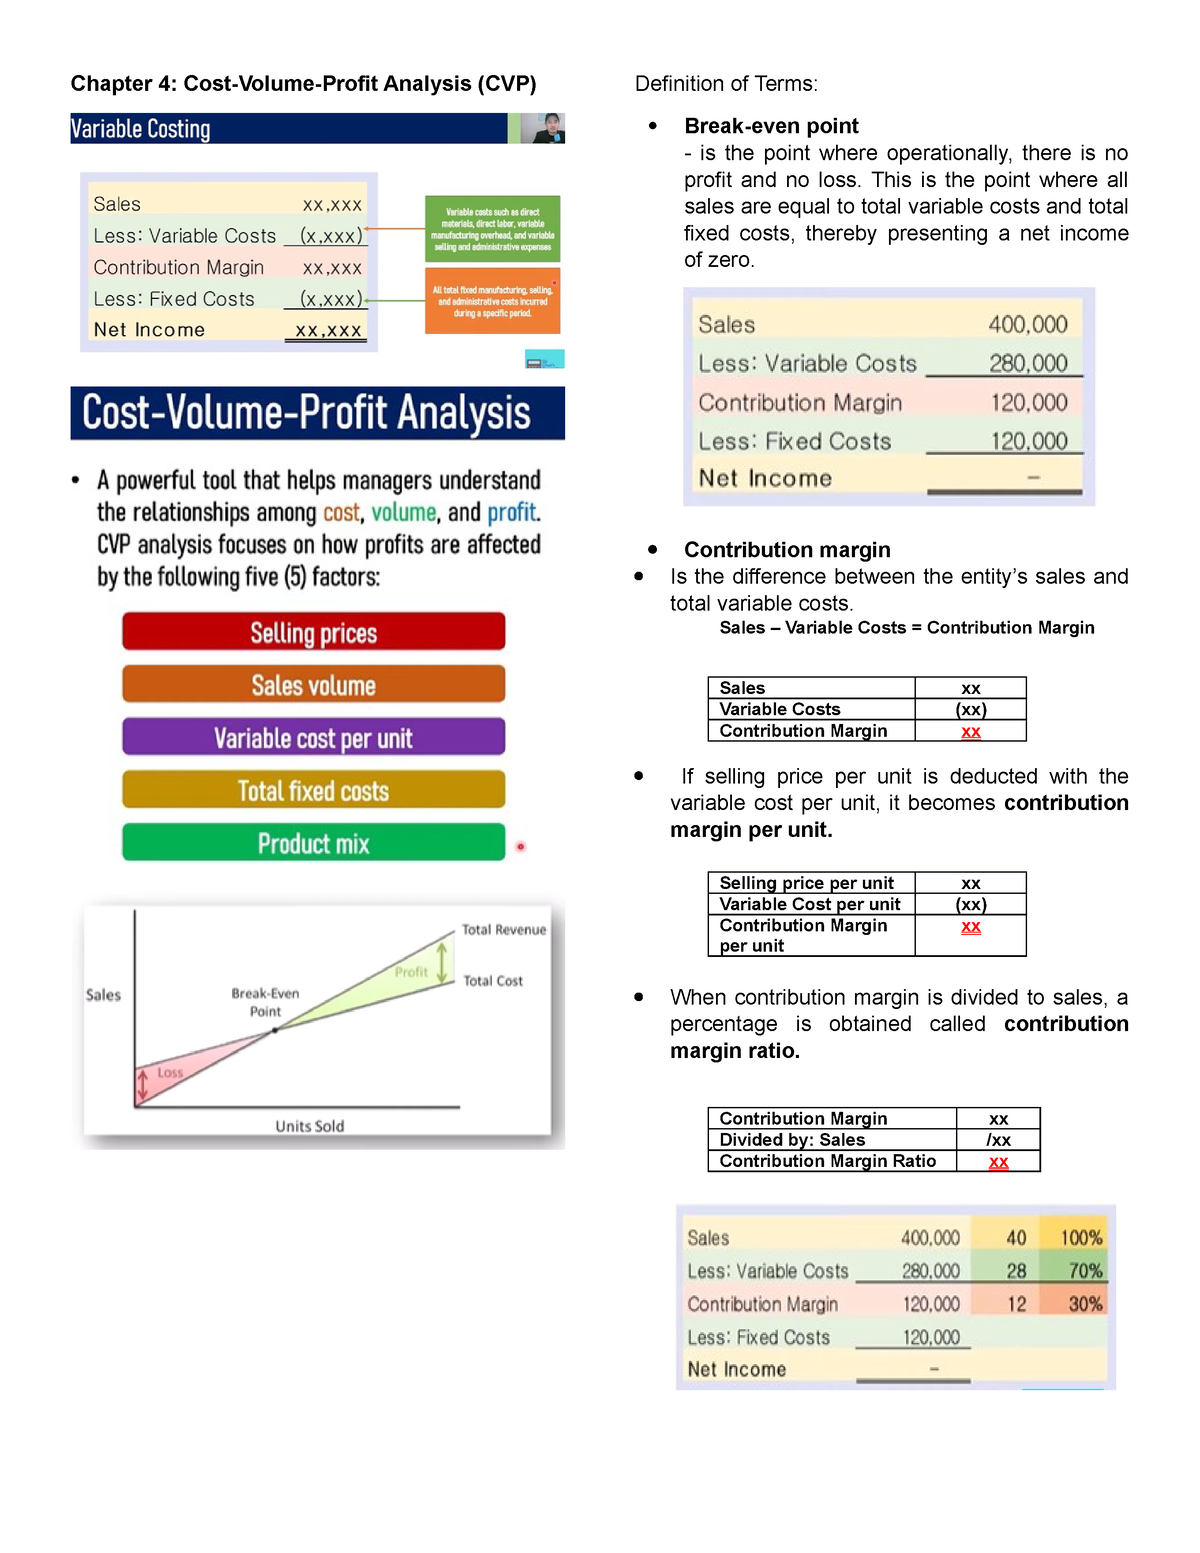 Cvp Analysis Strategic Costing Chapter 4 Cost Volume Profit Analysis Cvp Definition Of 9329